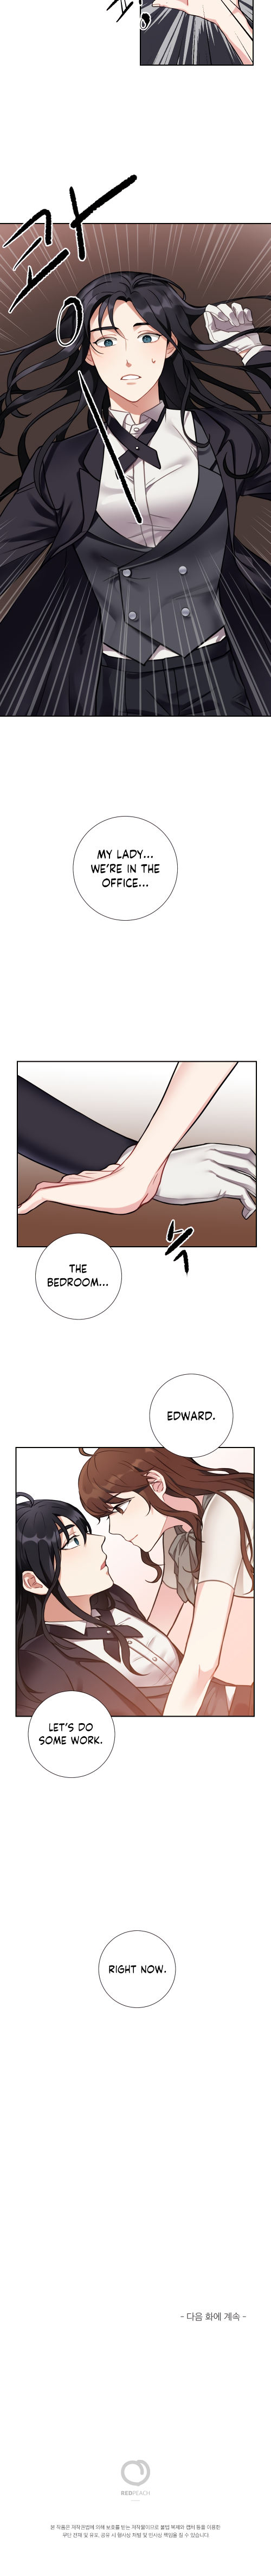 Lady & Maid - Chapter 2 Page 15